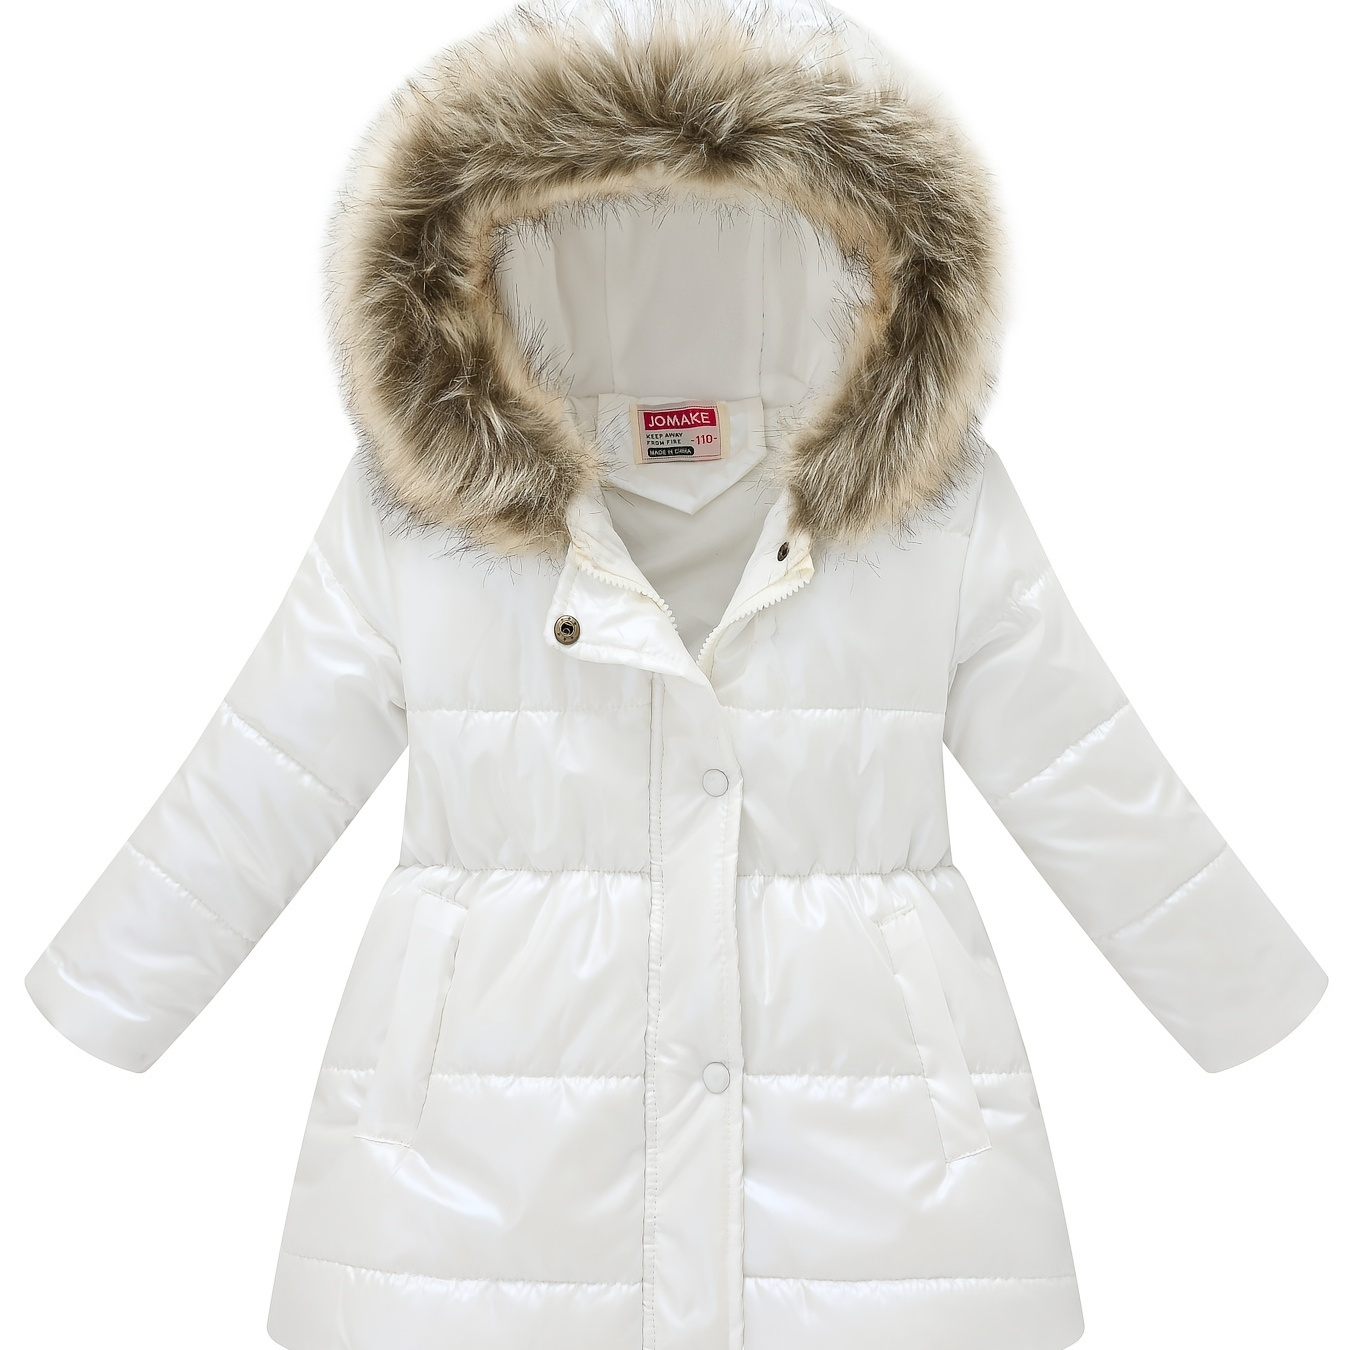 

Girls Dressy Cute Thermal Thickened Hooded Jacket, Down Alternative Padded Outwear For Winter